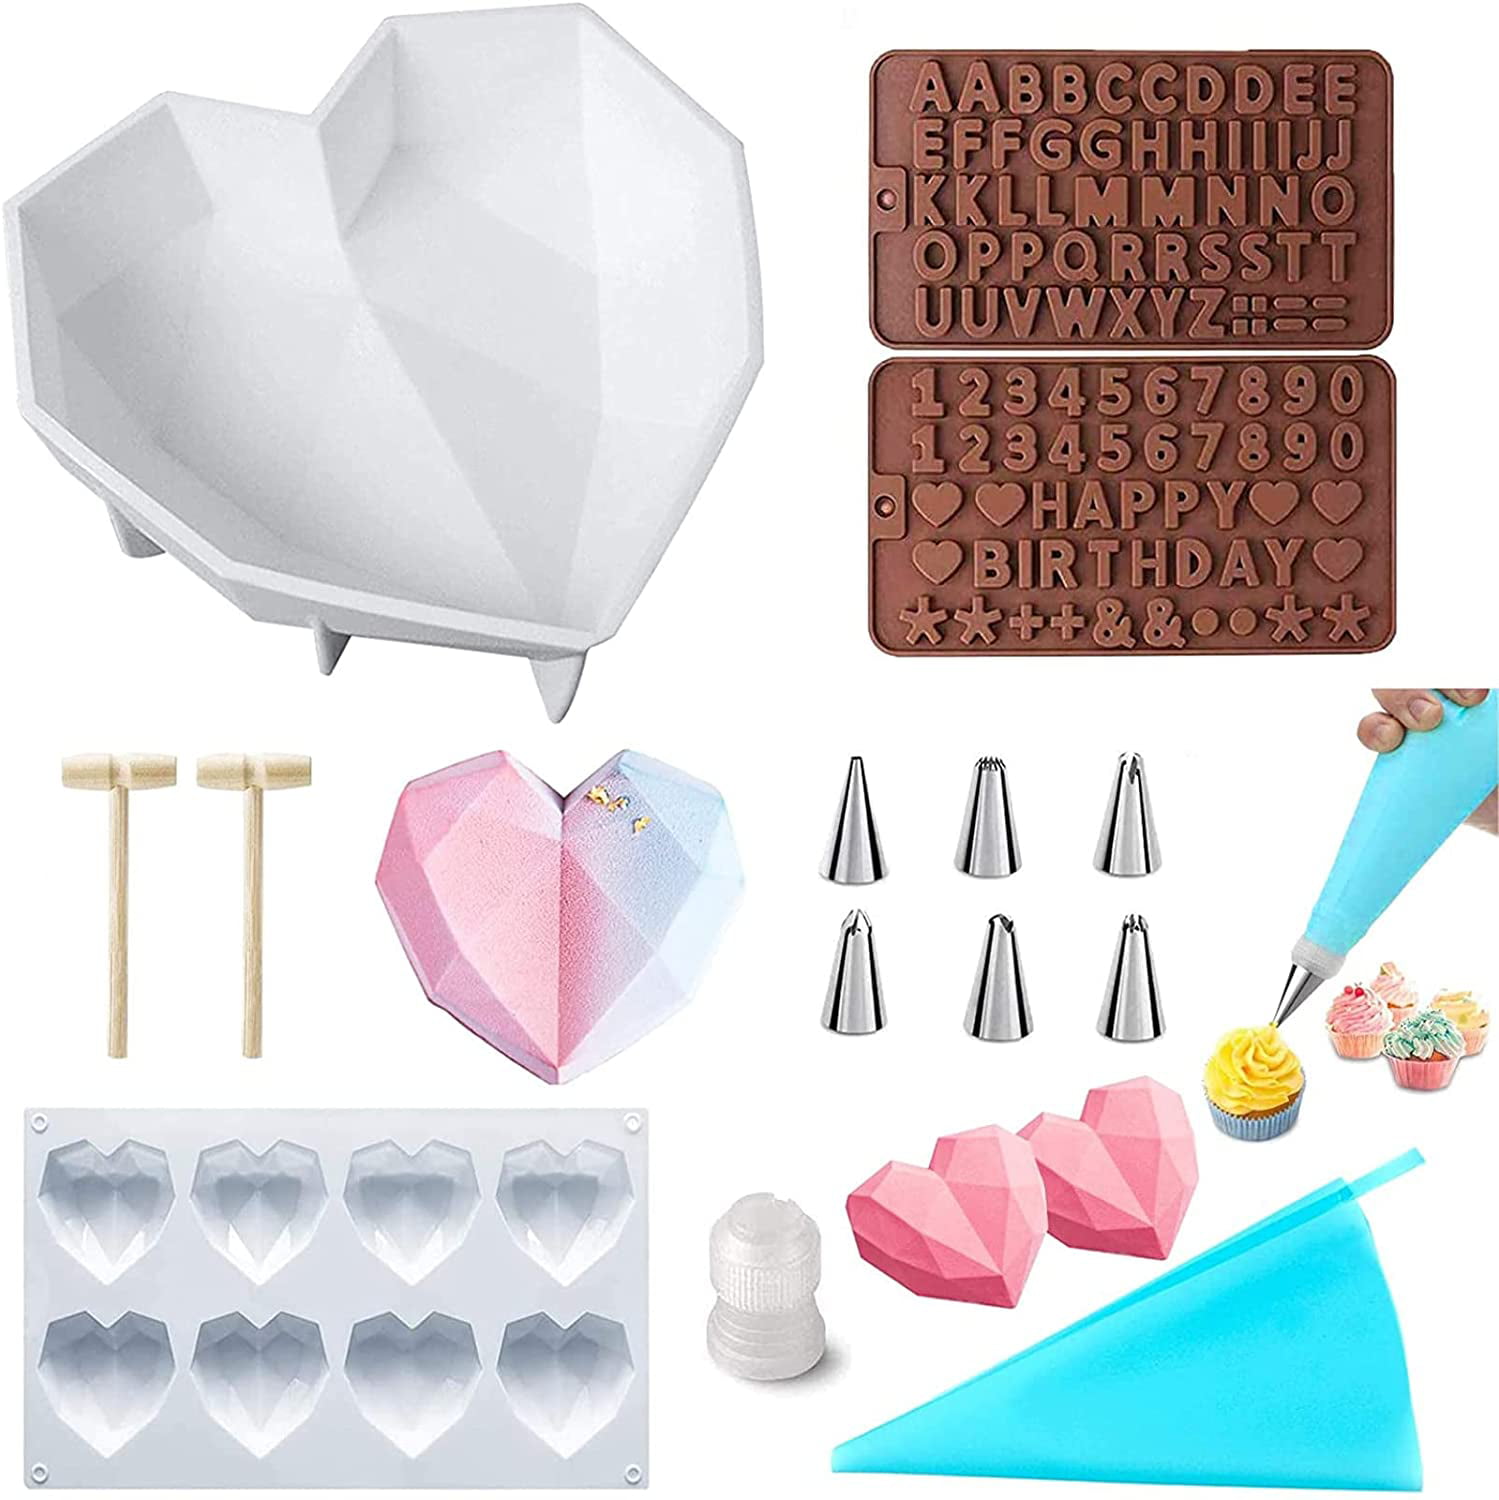 Diamond Heart Shape Silicone Cake Mold and Silicone Letter Mold and Number Chocolate Mold with 3 Pieces Mini Wooden Hammers 2 Pieces Dropper for Home Kitchen DIY Baking Tools 